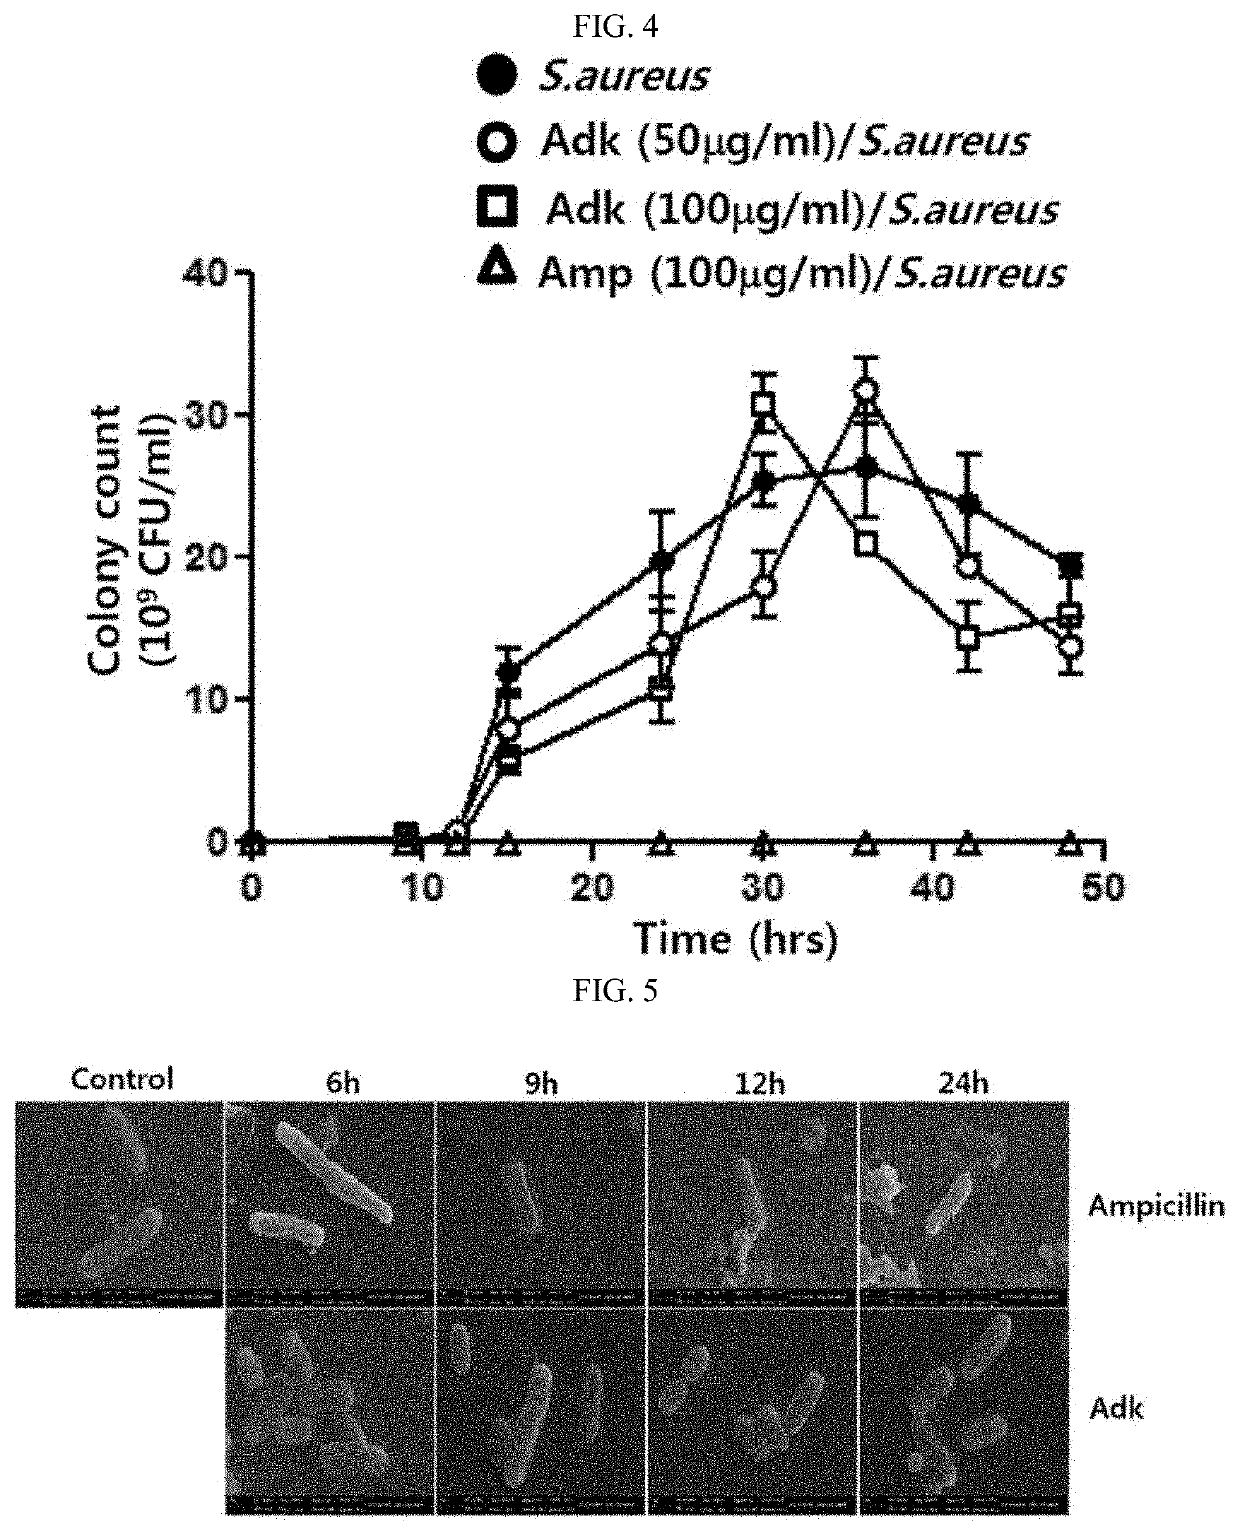 Antibacterial composition containing ADK protein as active ingredient, or composition for preventing or treating sepsis